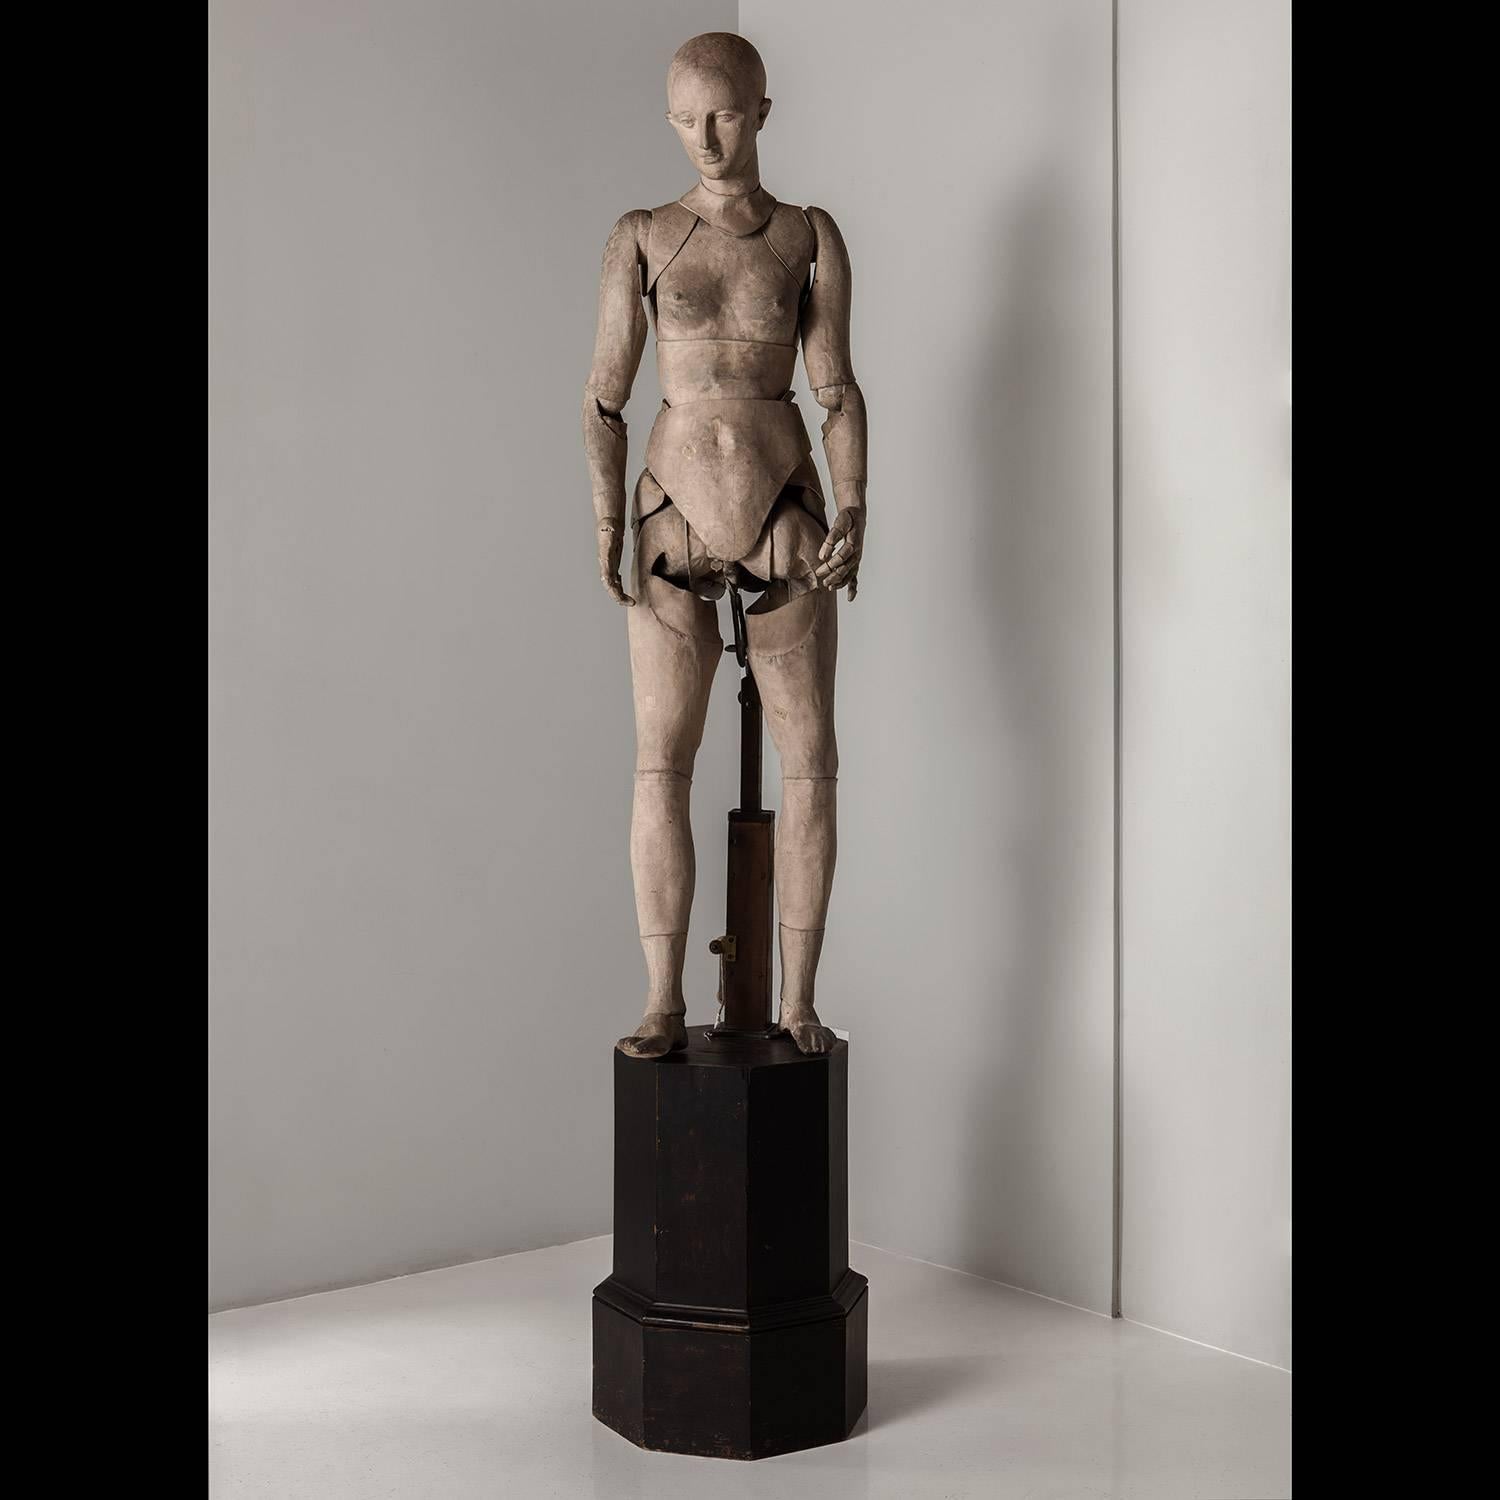 Paper Mâché artist model, Mannequin, France, circa 1850. Fully articulated mannequin, composed of a simple wooden structure underneath an exquisite composite- paper body, with metal springs and leather straps allowing for an amazing range of